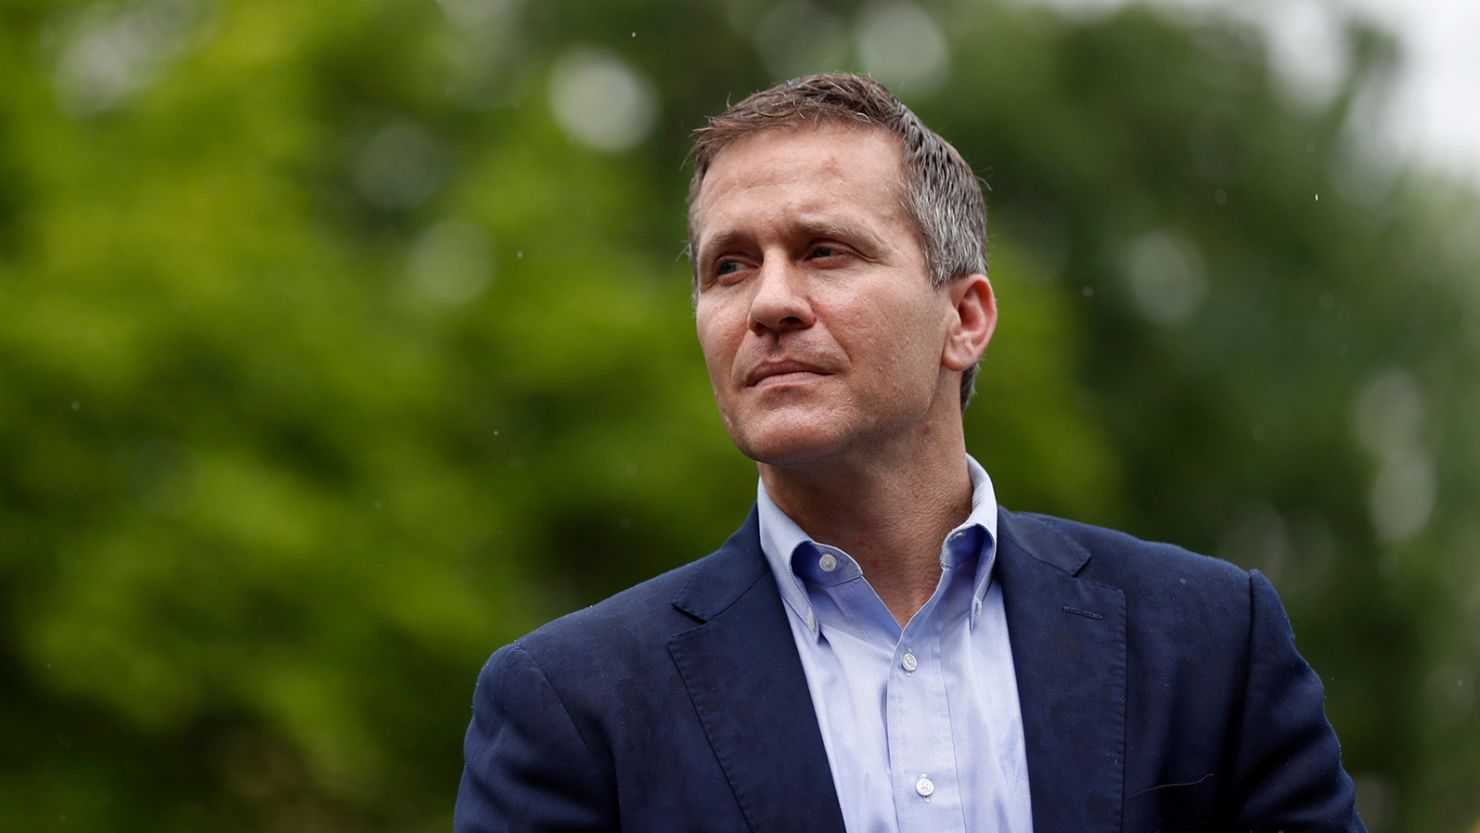 Then-Missouri Gov. Eric Greitens waits to deliver remarks to a small group of supporters near the capitol in Jefferson City, Missouri, in May 2018.